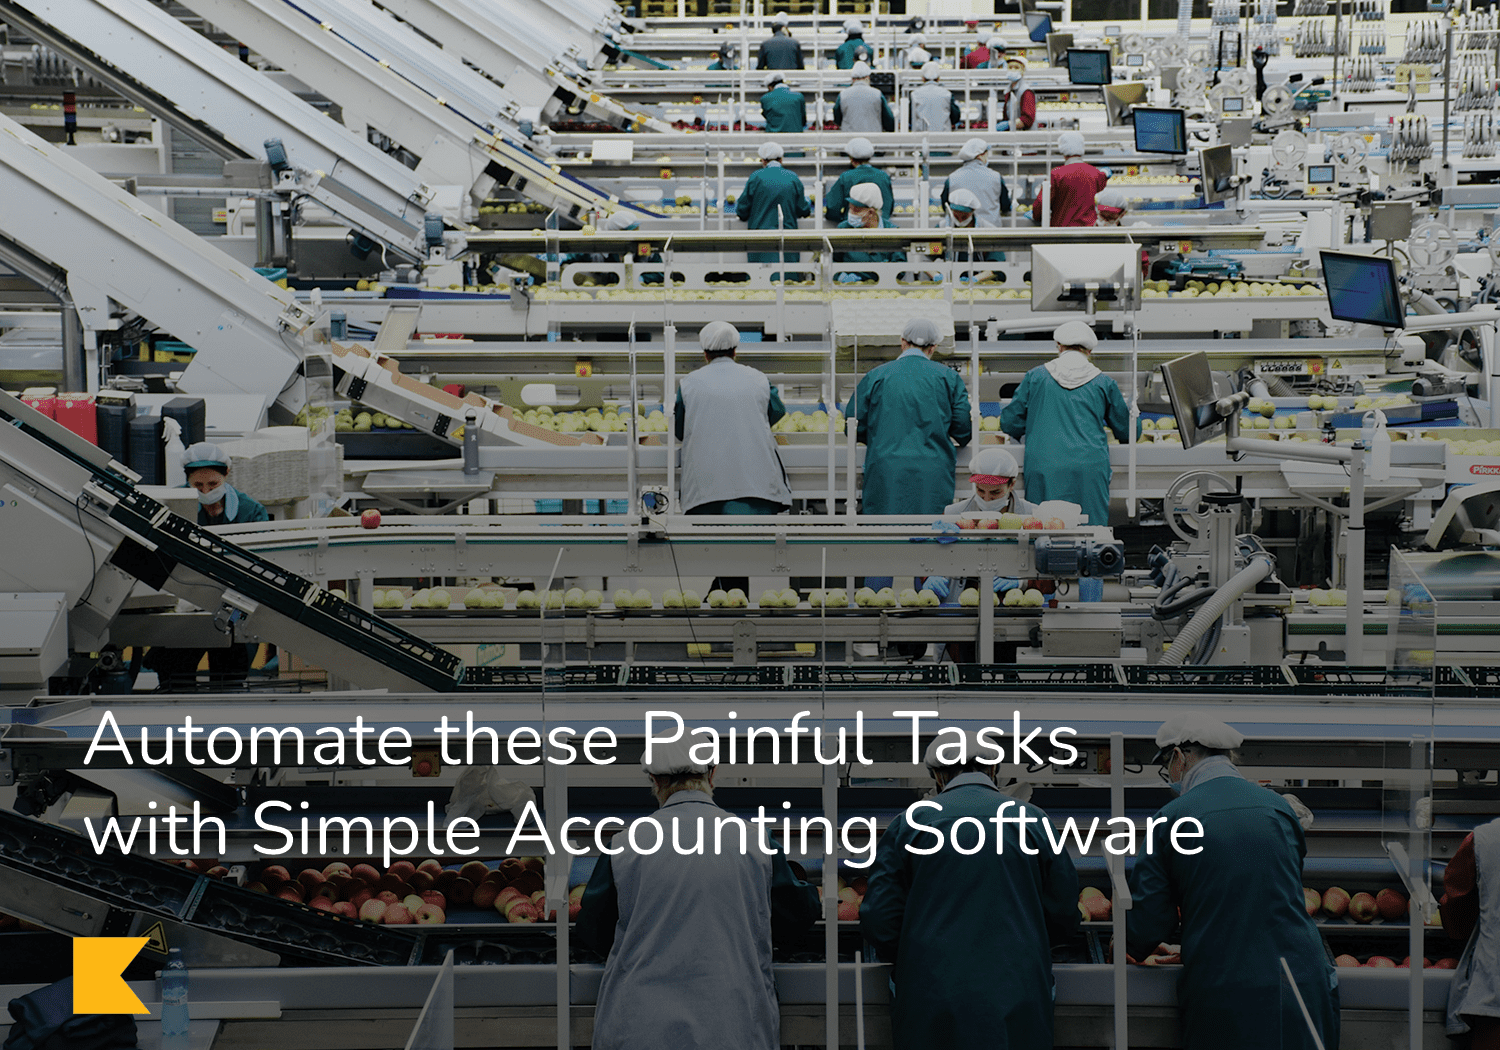 Automate these painful tasks with simple accounting software